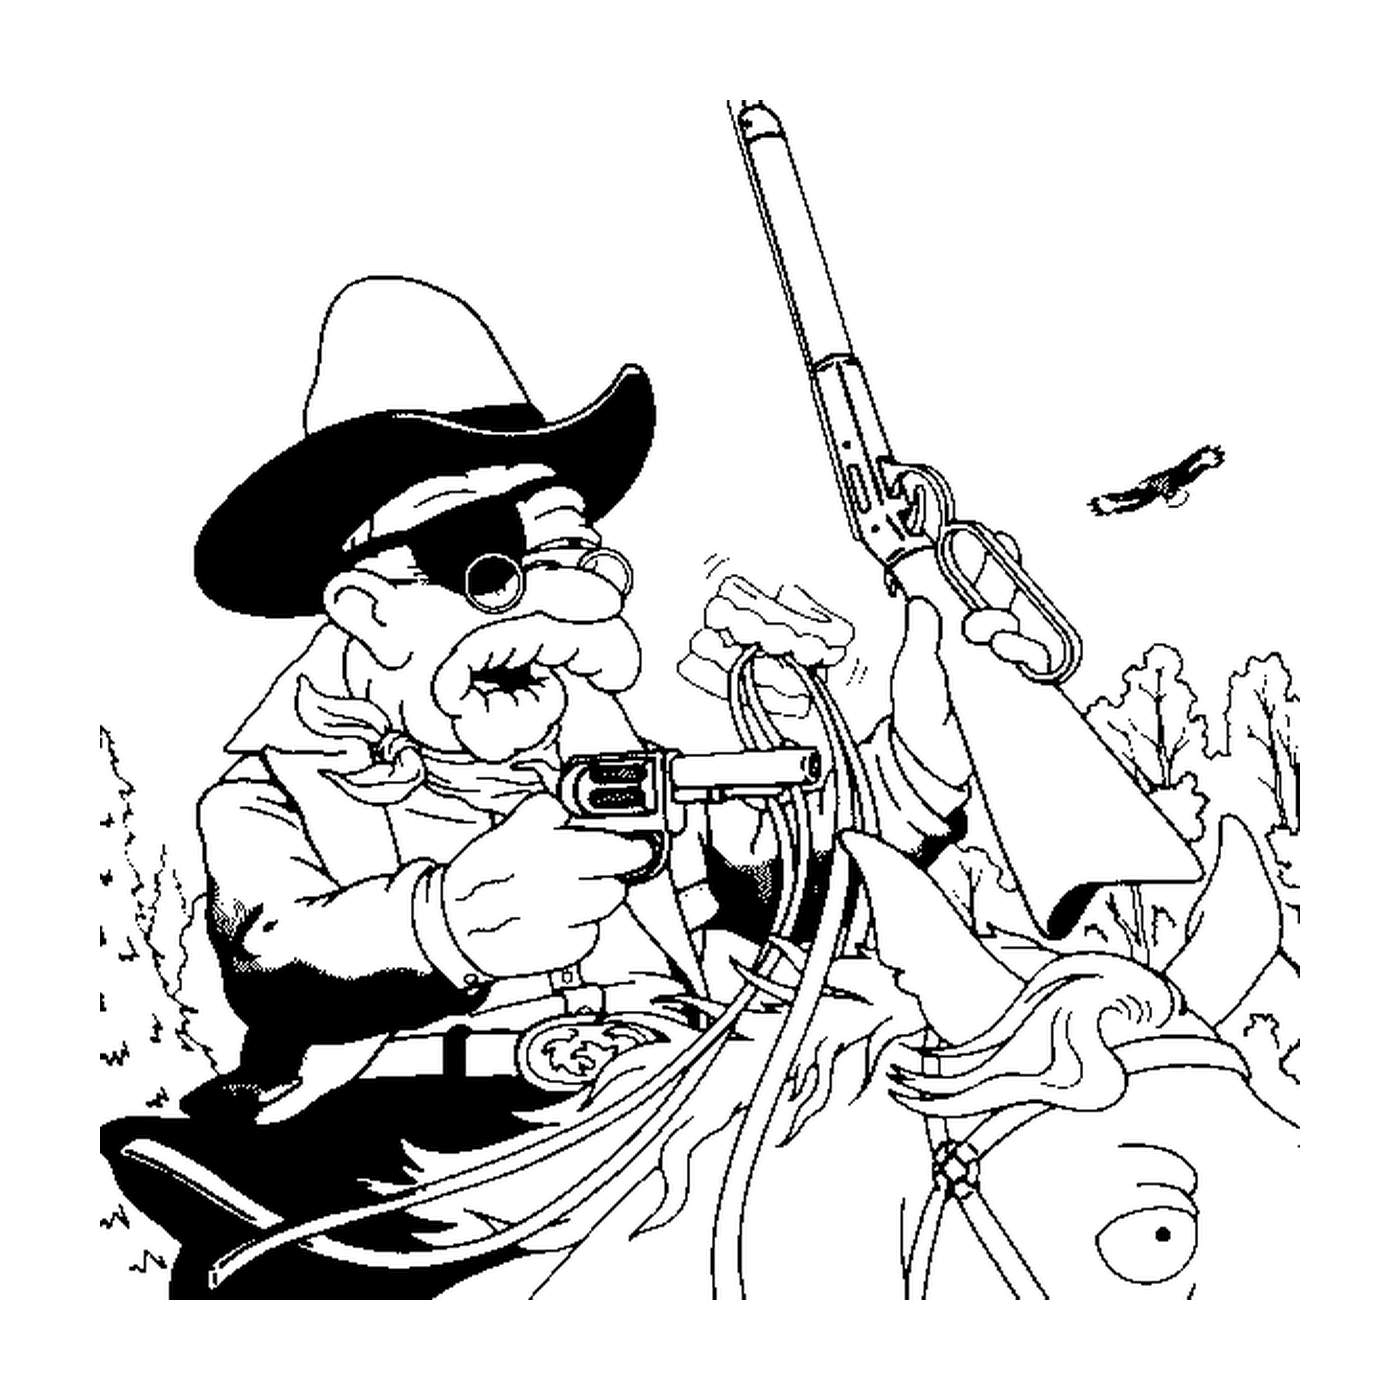  Abraham is a cowboy, old man with hat and gun 